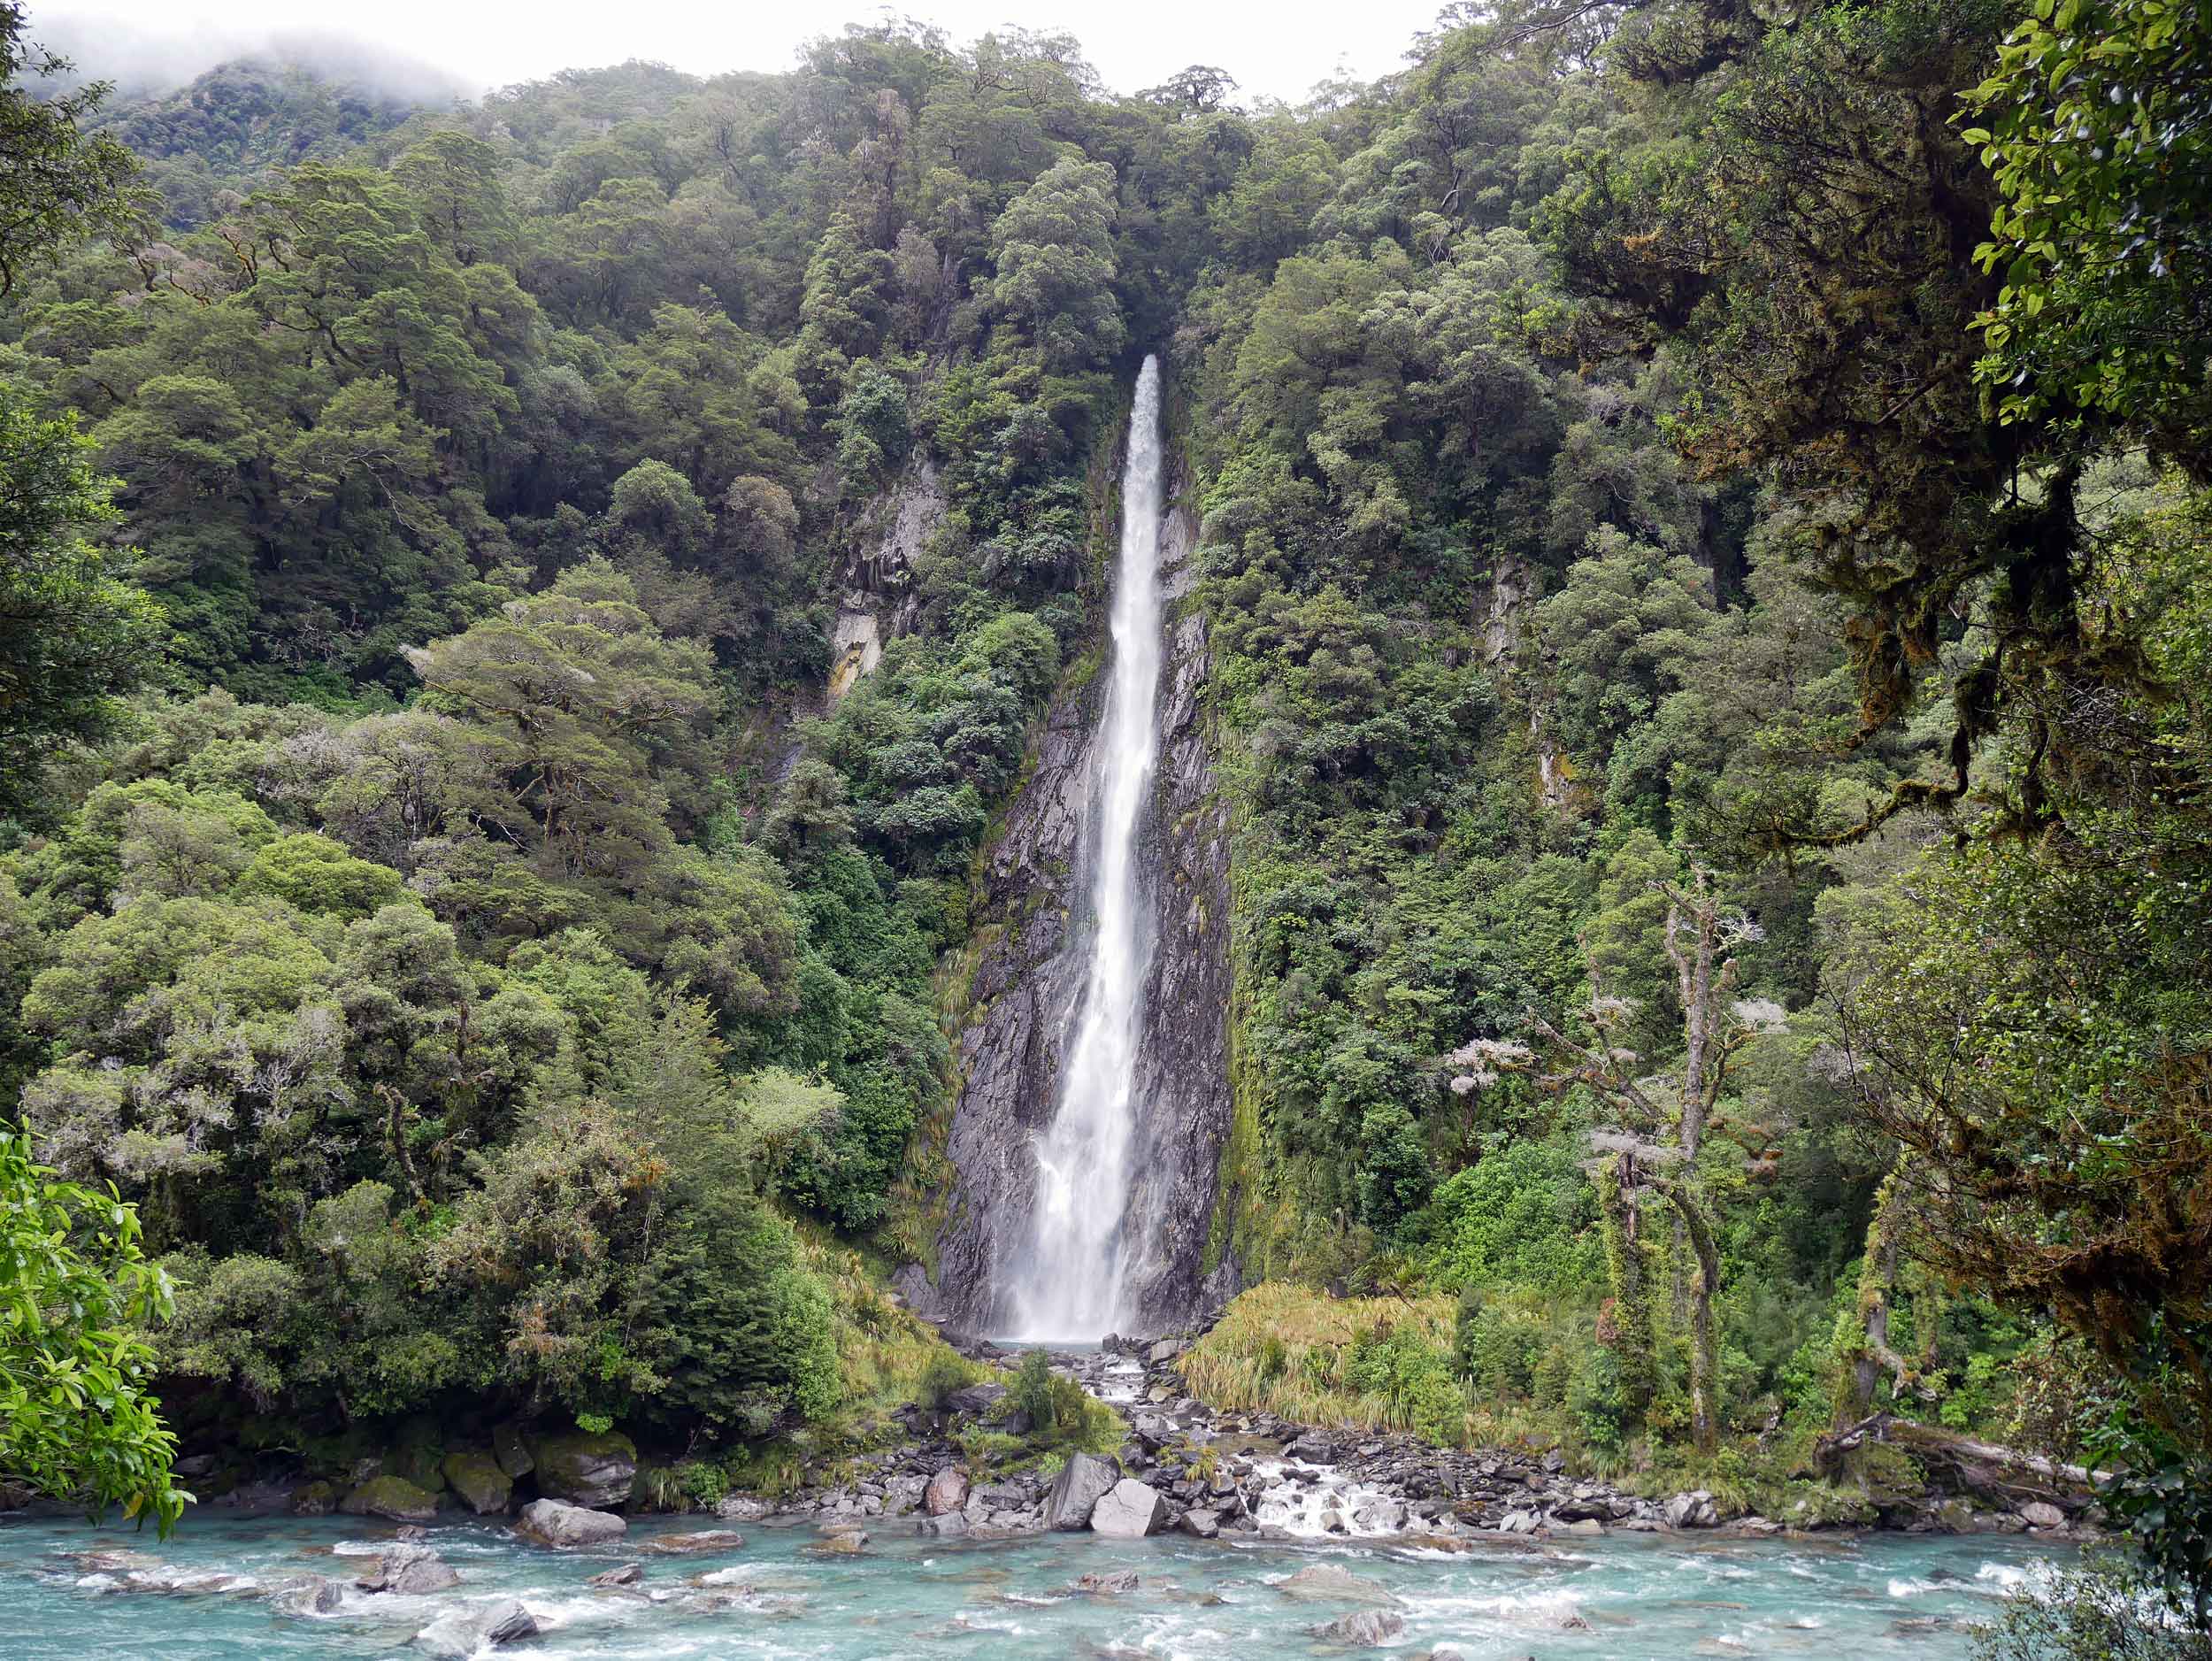  Driving from the West Coast to Queenstown along Haast Highway, we discovered one of New Zealand's tallest waterfalls (96 metres), Thunder Creek Falls (jan 7).&nbsp; 